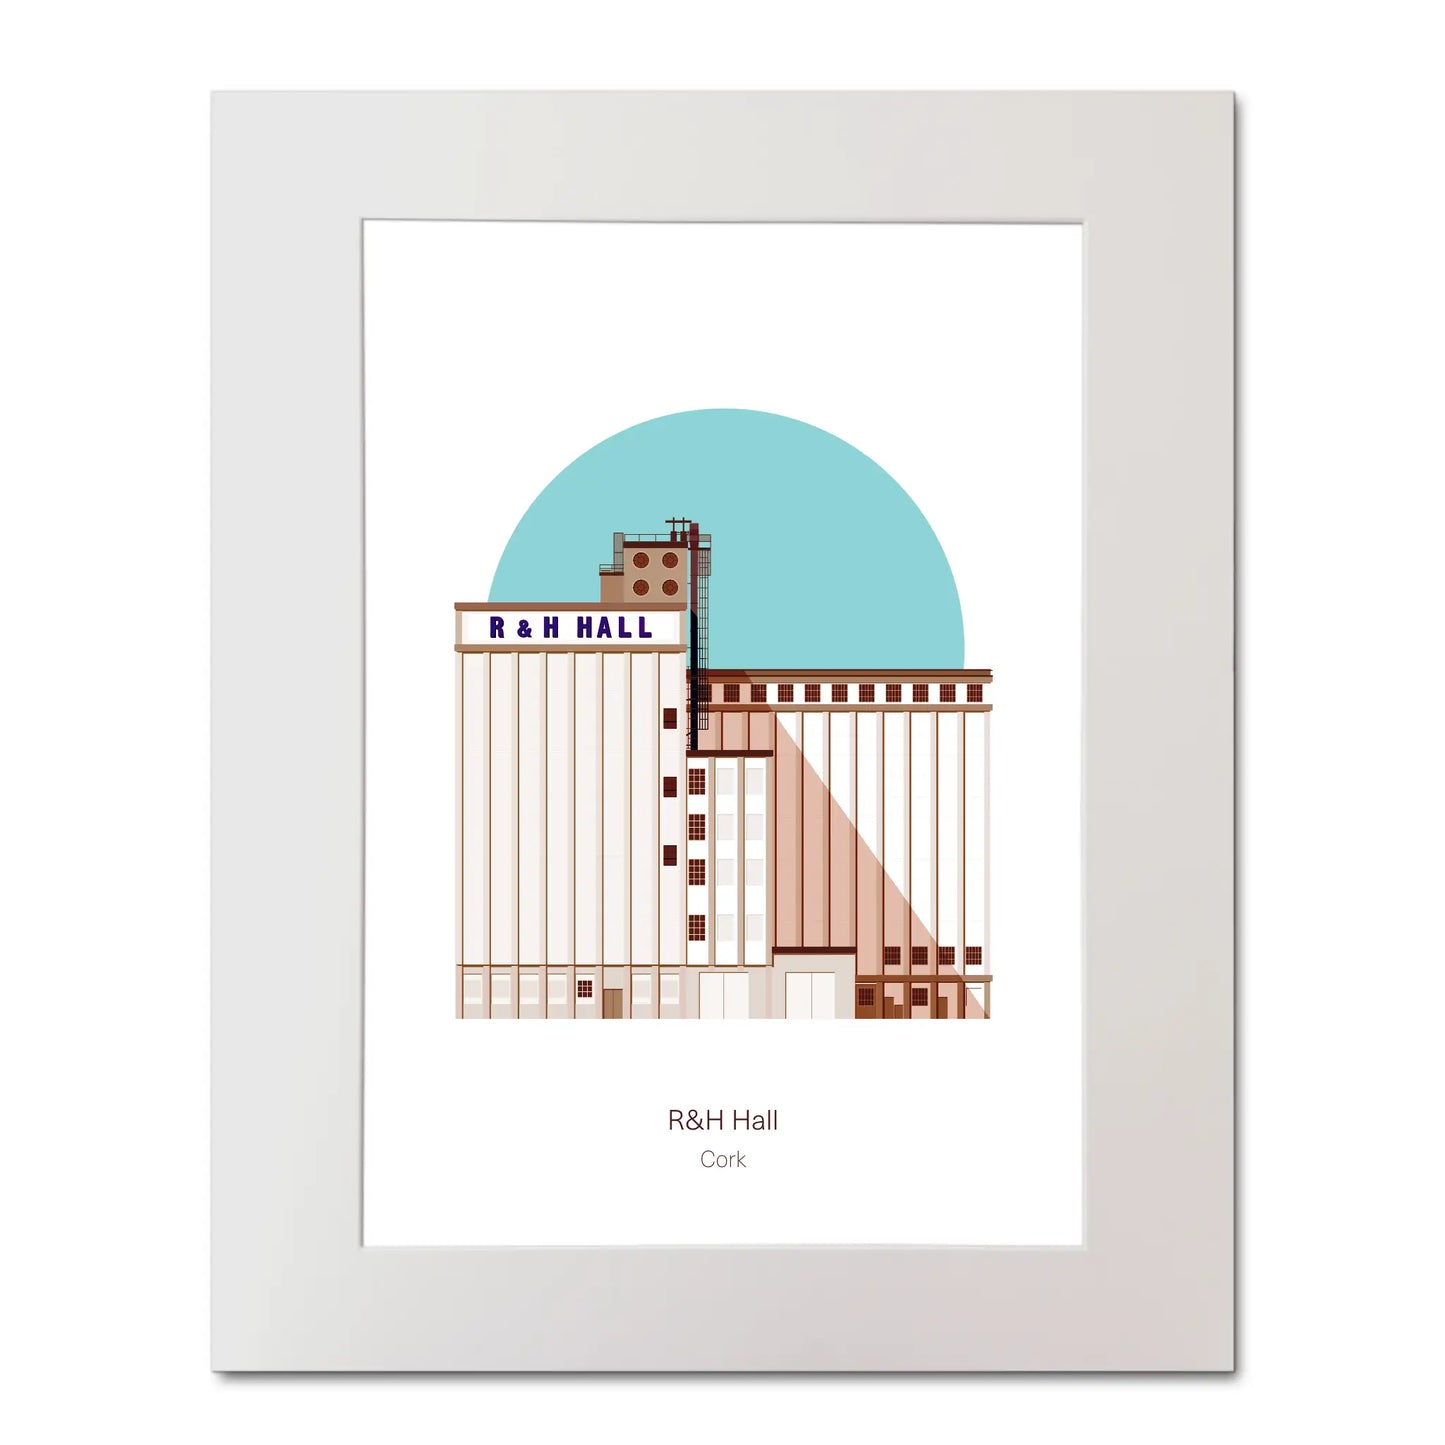 Mounted contemporary art print of R&H Hall in Port of Cork, with blue background.